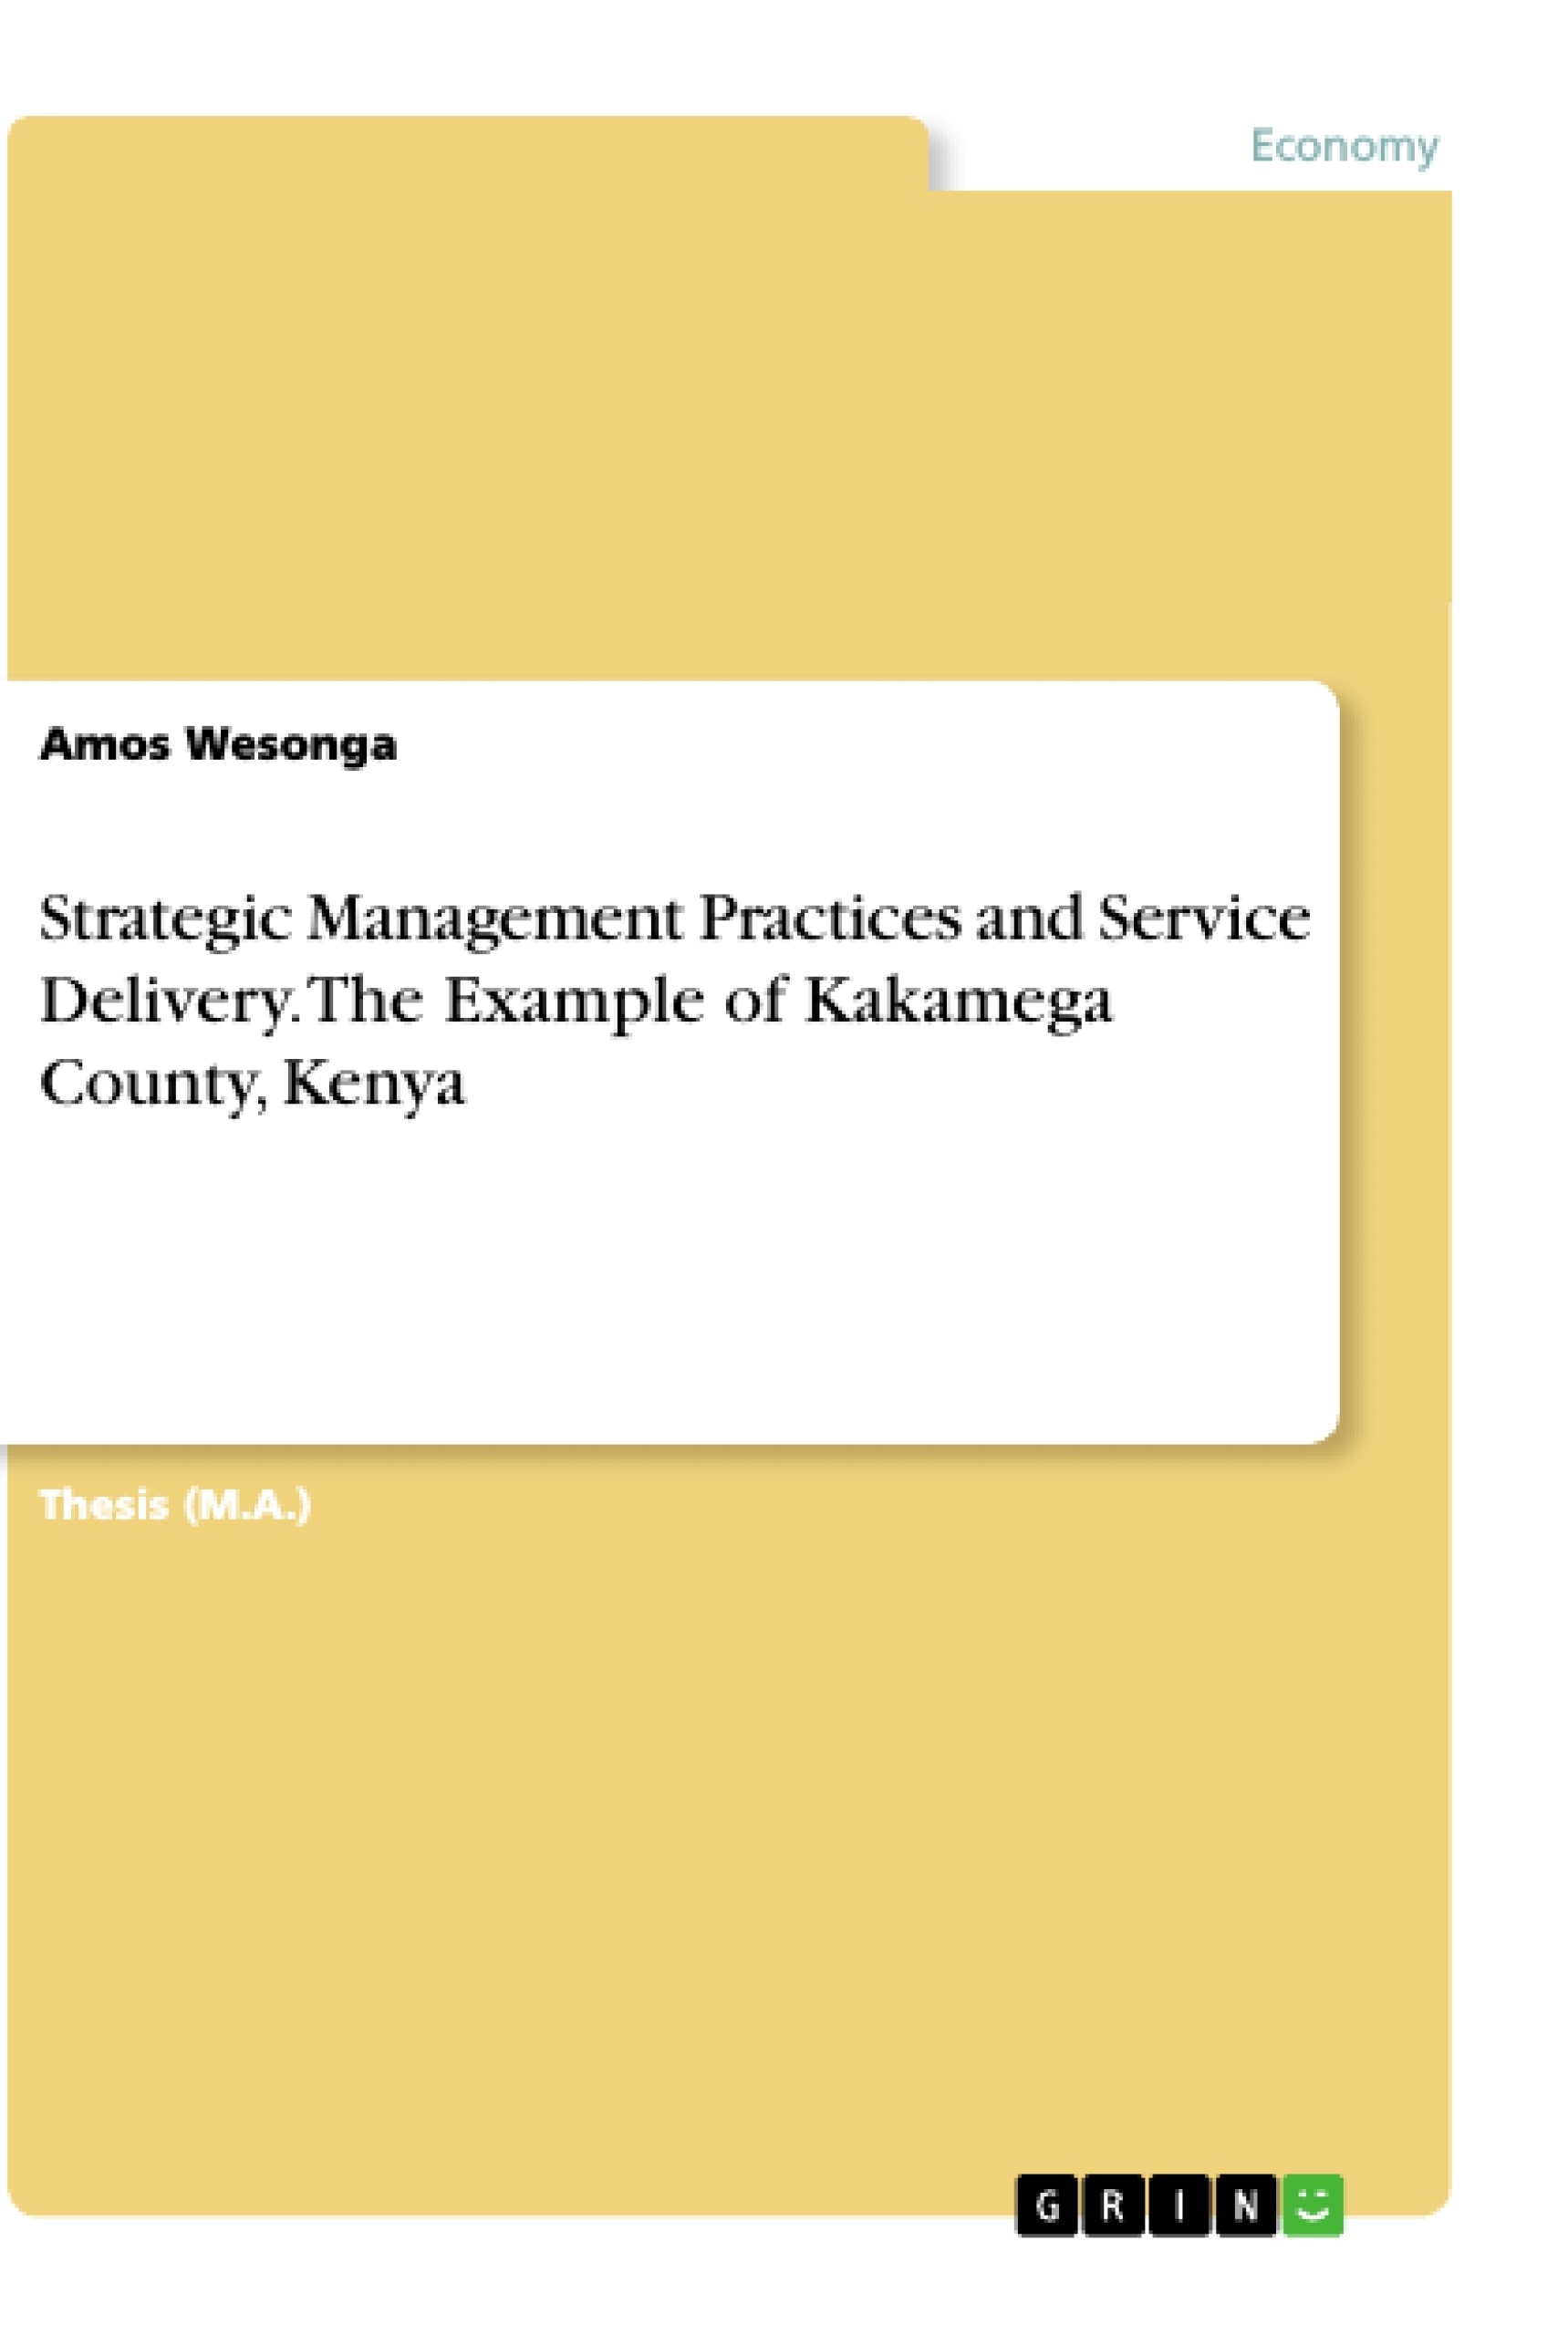 Titre: Strategic Management Practices and Service Delivery. The Example of Kakamega County, Kenya